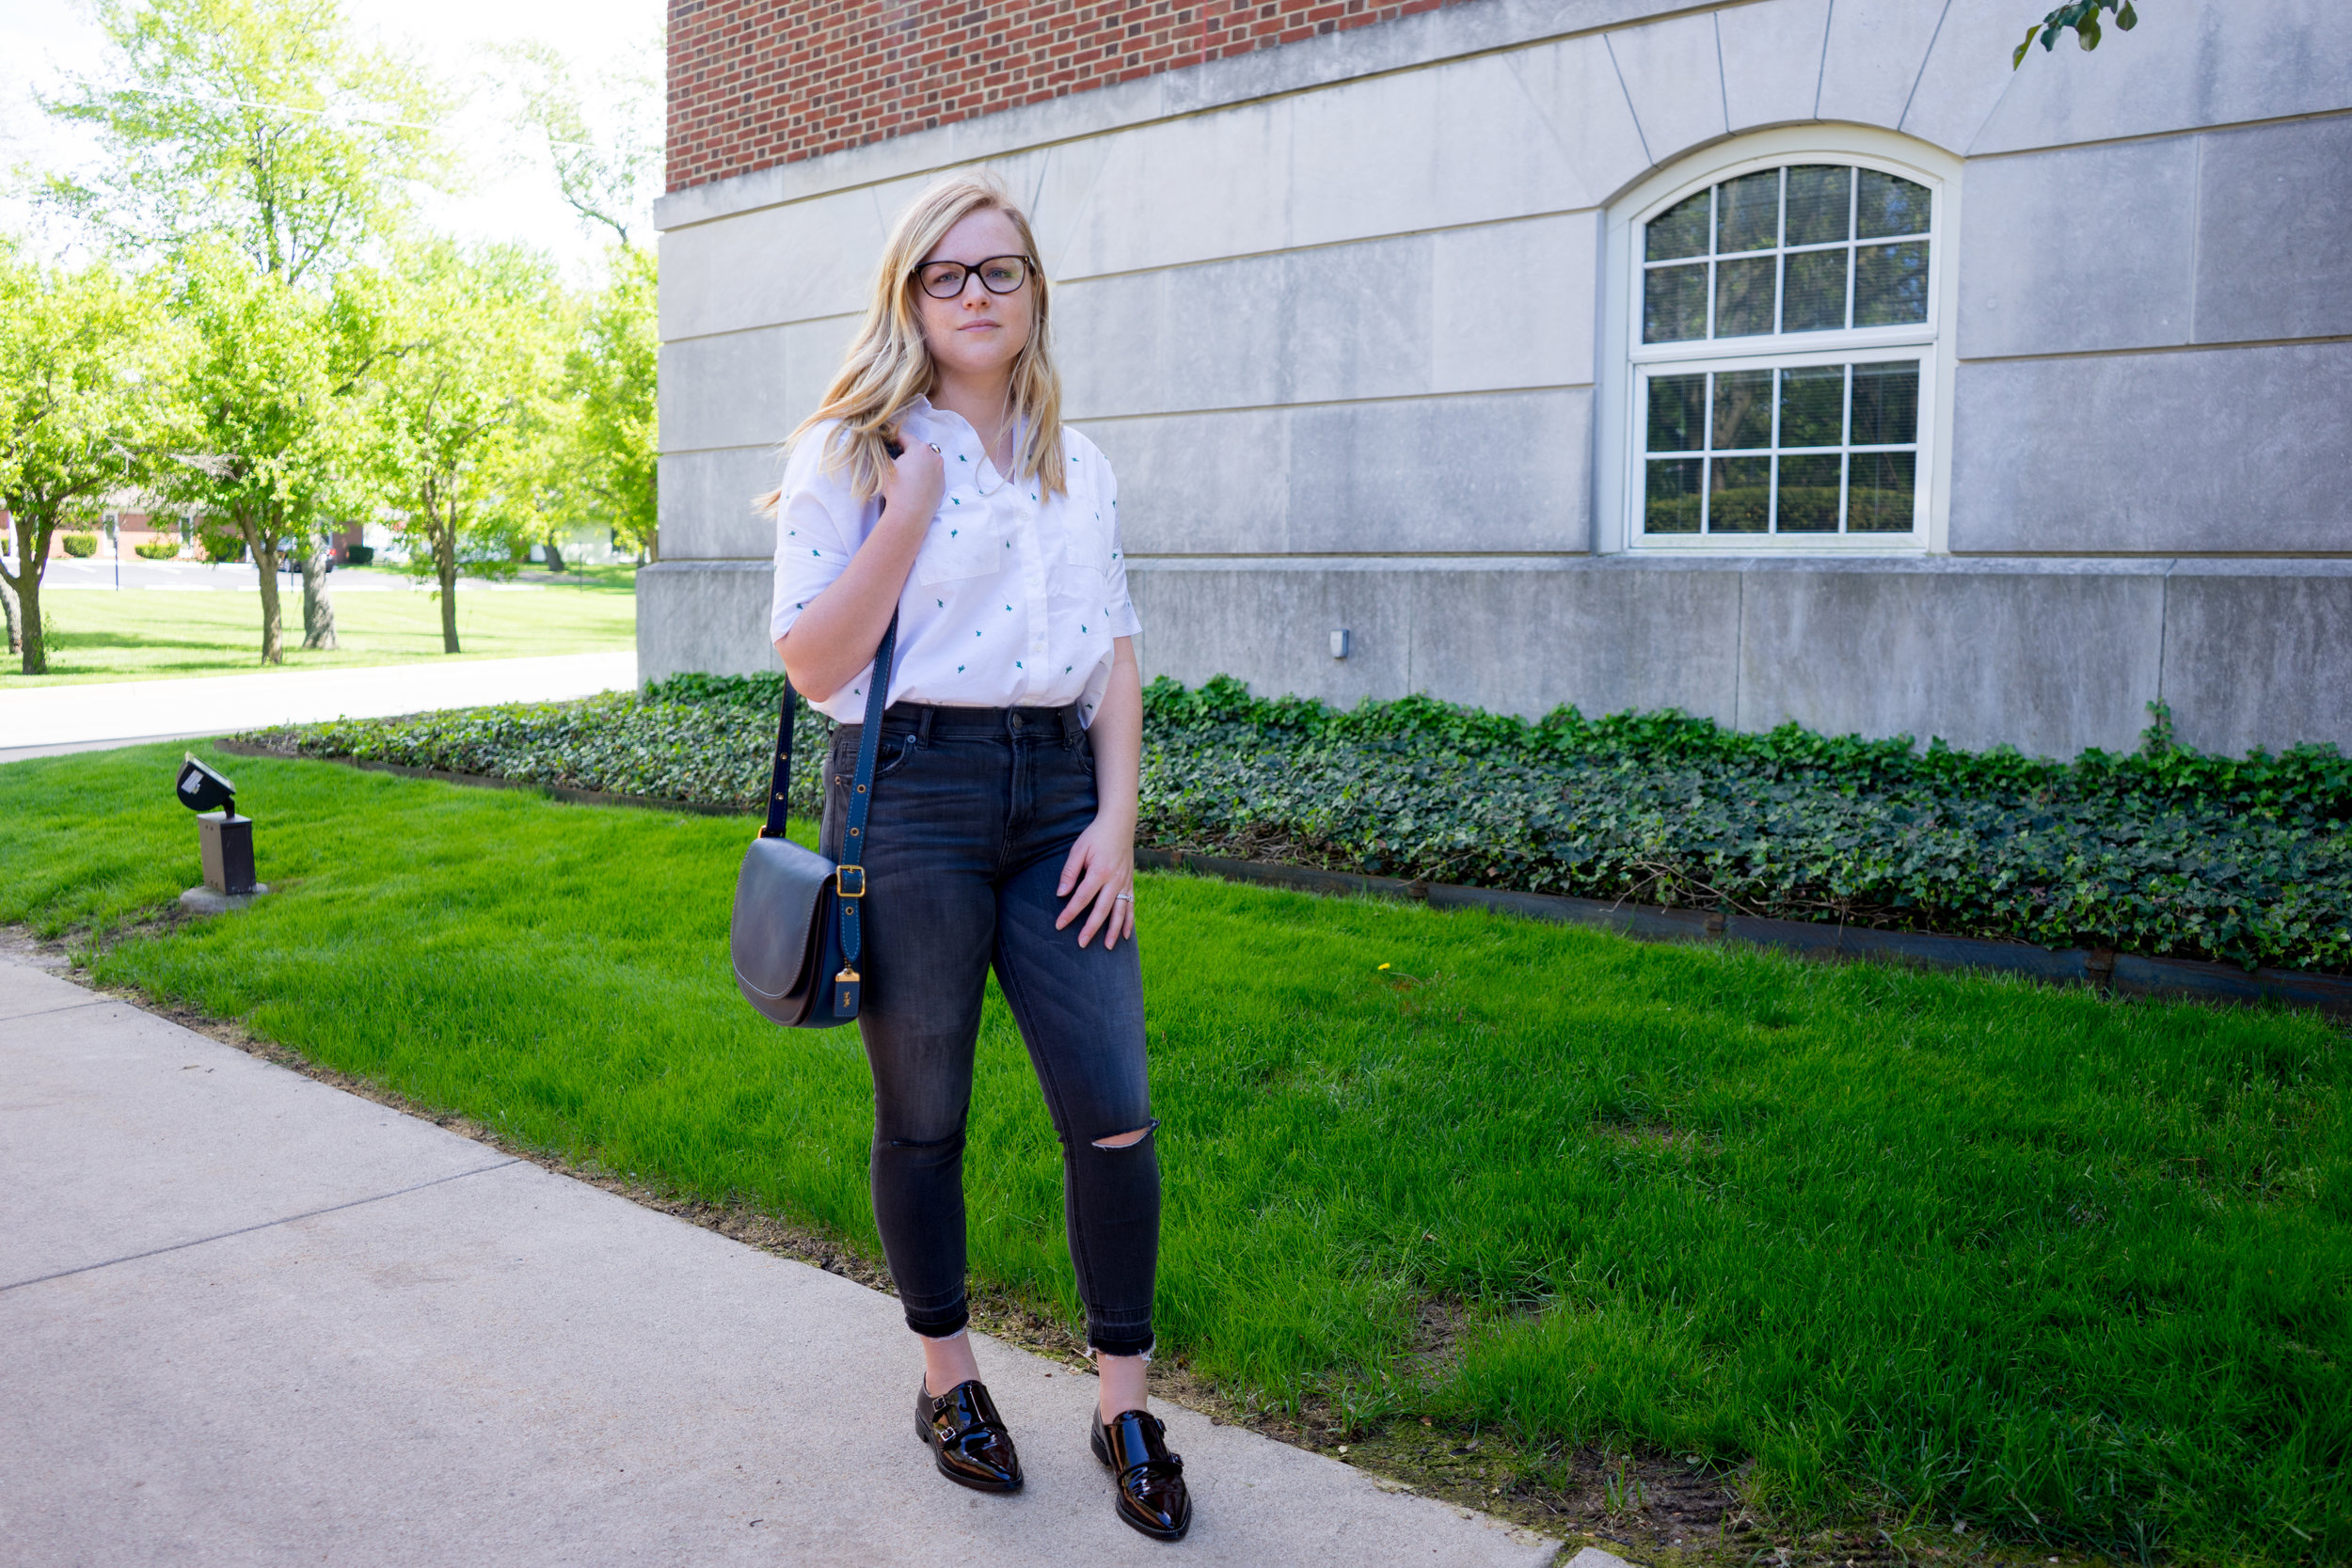 Maggie a la Mode - Madewell Cactus Embroidered Courier Shirt, Aquatalia Harlow Monk Strap Loafers, Coach Saddle 23 Saddlebag, Express Distressed High Waisted Release Hem Ankle Jean Legging